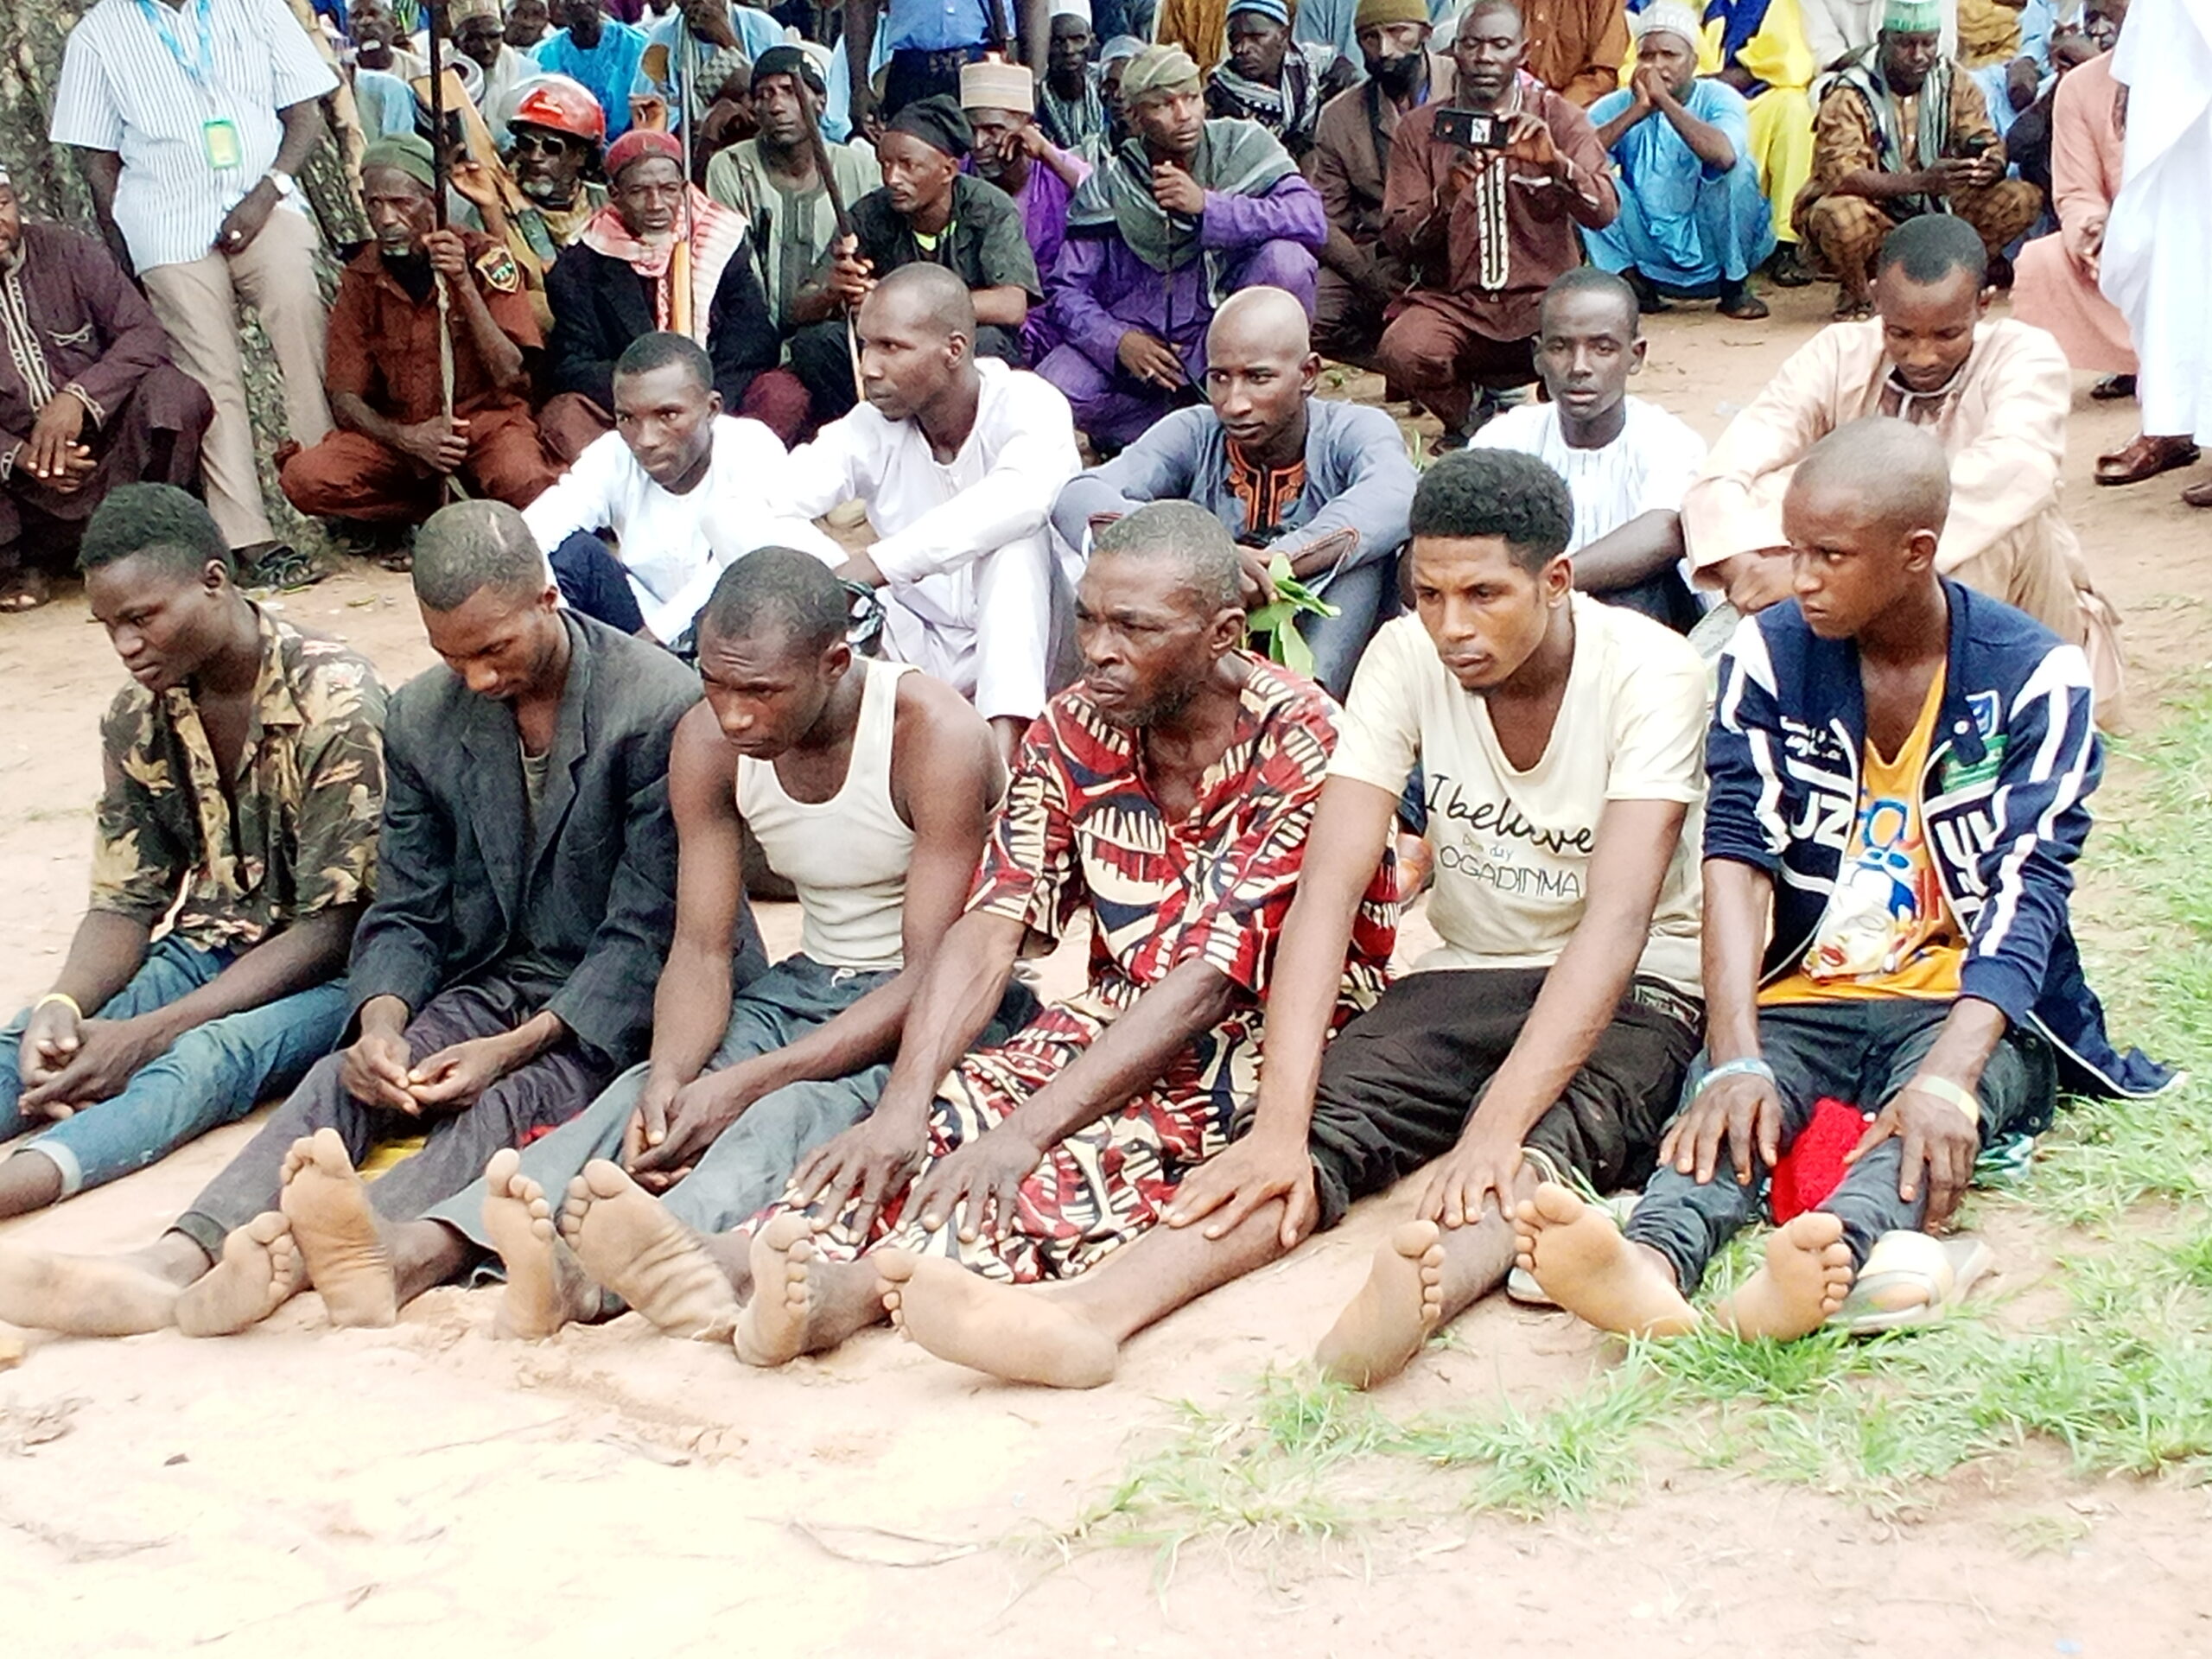 Miyyetti Allah Hands Over 11 ‘kidnappers’ To Police In Taraba